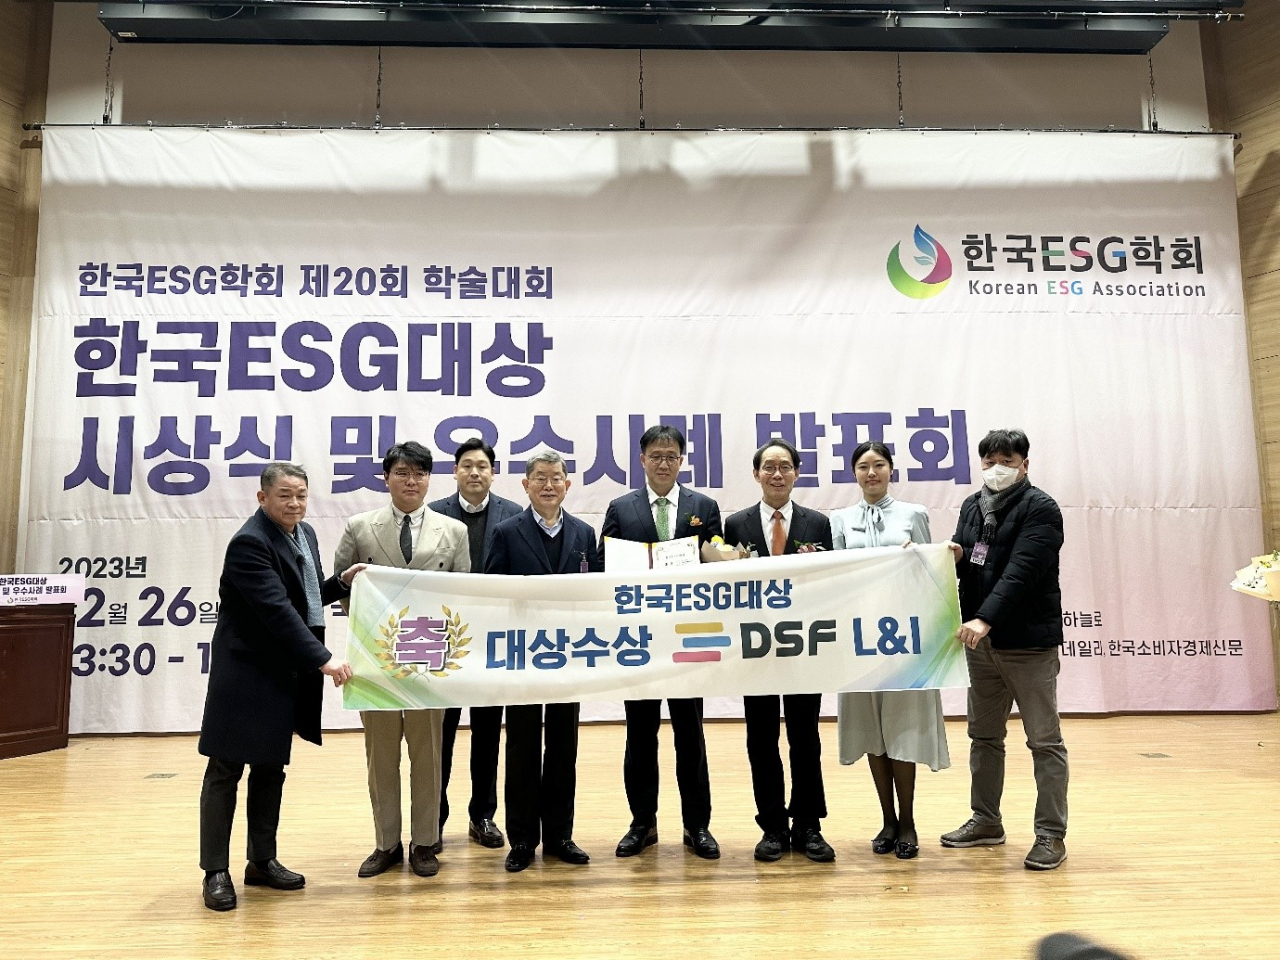 DSF L&I CEO Park Nam (center, fourth from right), Former National Assembly member and New Paradigm Institute President Moon Kook-hyun (fourth from left), and Korean ESG Association President Koh Moon-hyun (third from right) pose for a photo as part of the ESG award ceremony hosted by Korean ESG Association and National Assembly-led ESG forum at the National Assembly Building in Seoul, Tuesday. (DSF L&I)